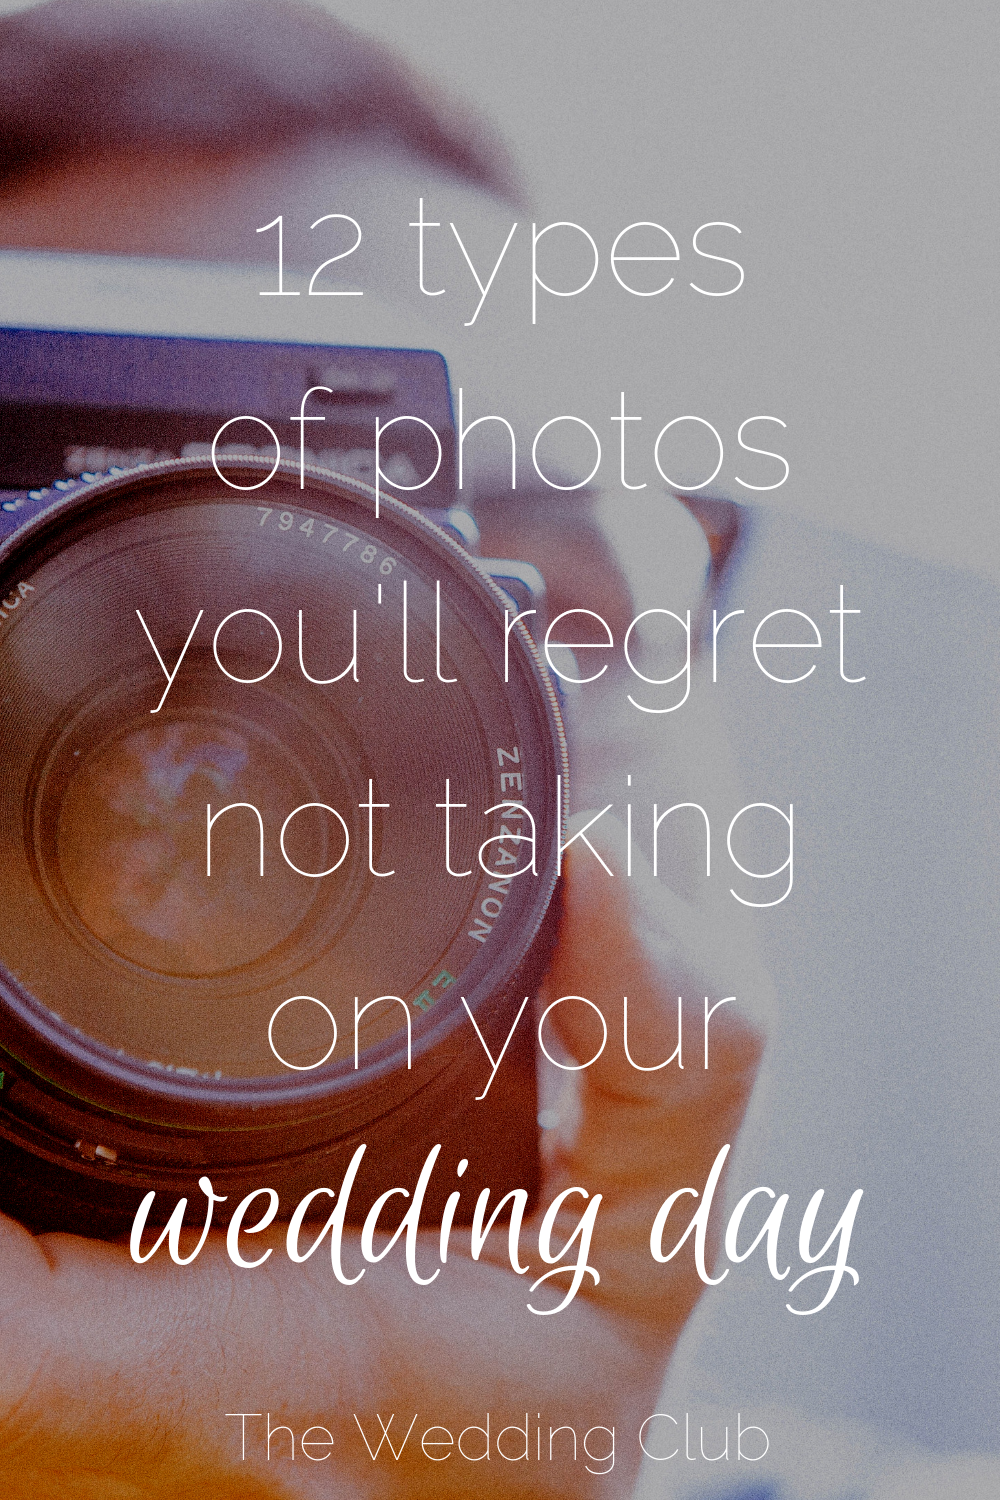 12 Types of Photos you’ll regret not taking on your wedding day